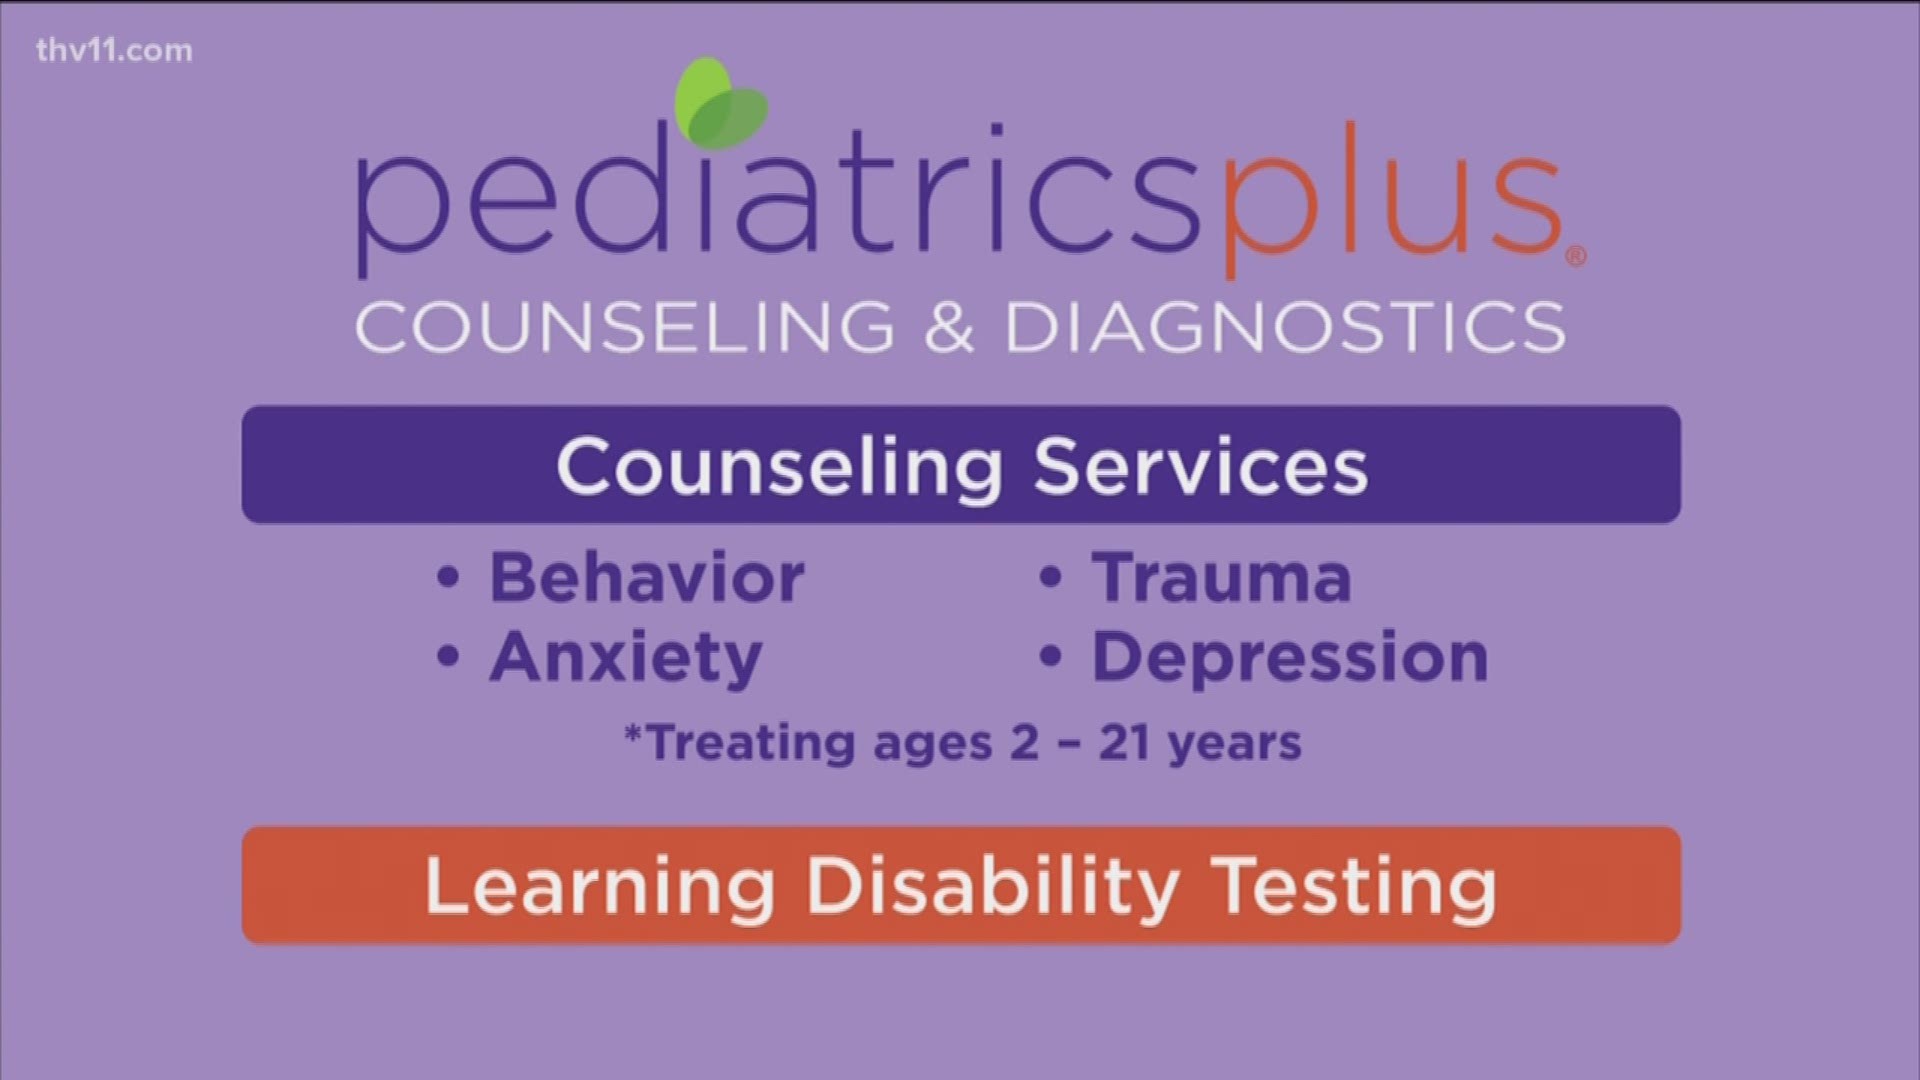 Pediatrics Plus offers a variety of counseling services for families. Learn more at PediatricsPlus.com.